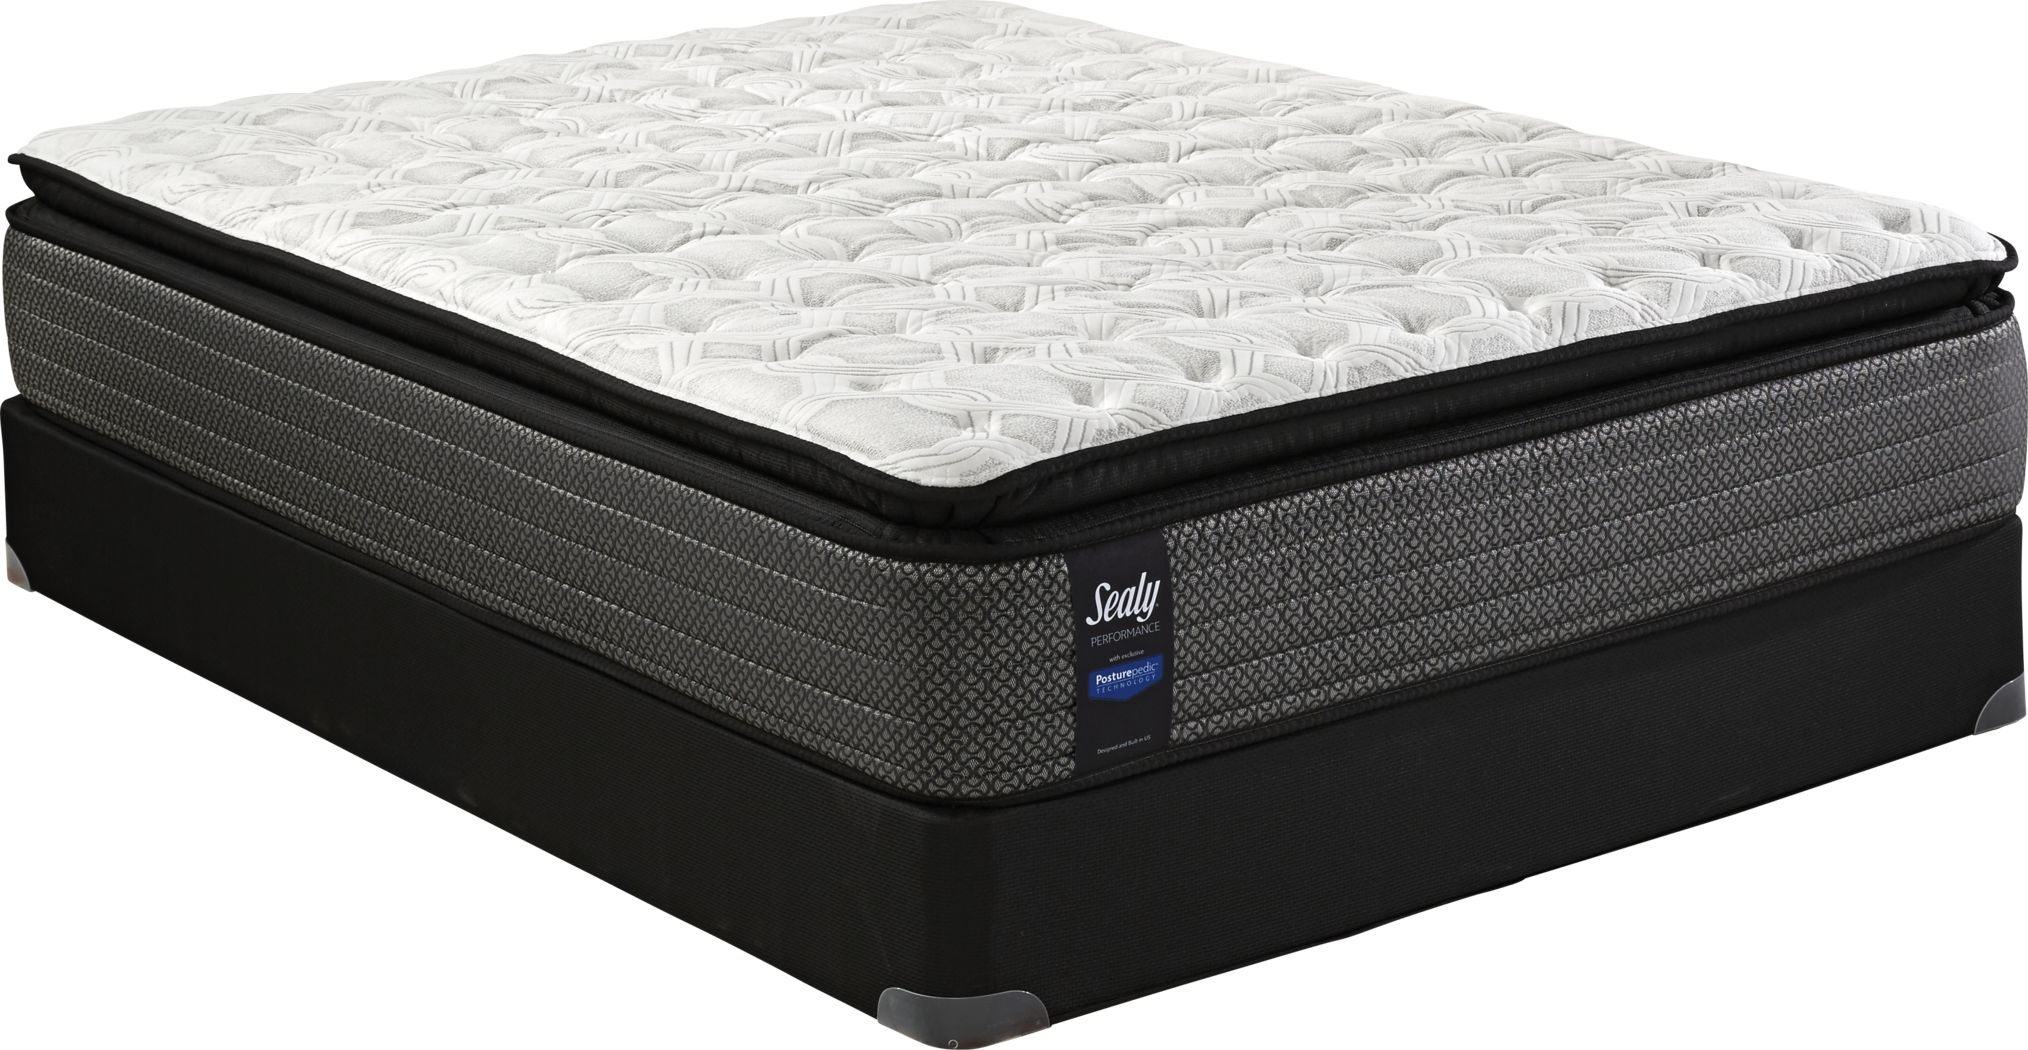 sealy cambria heights firm queen mattress set